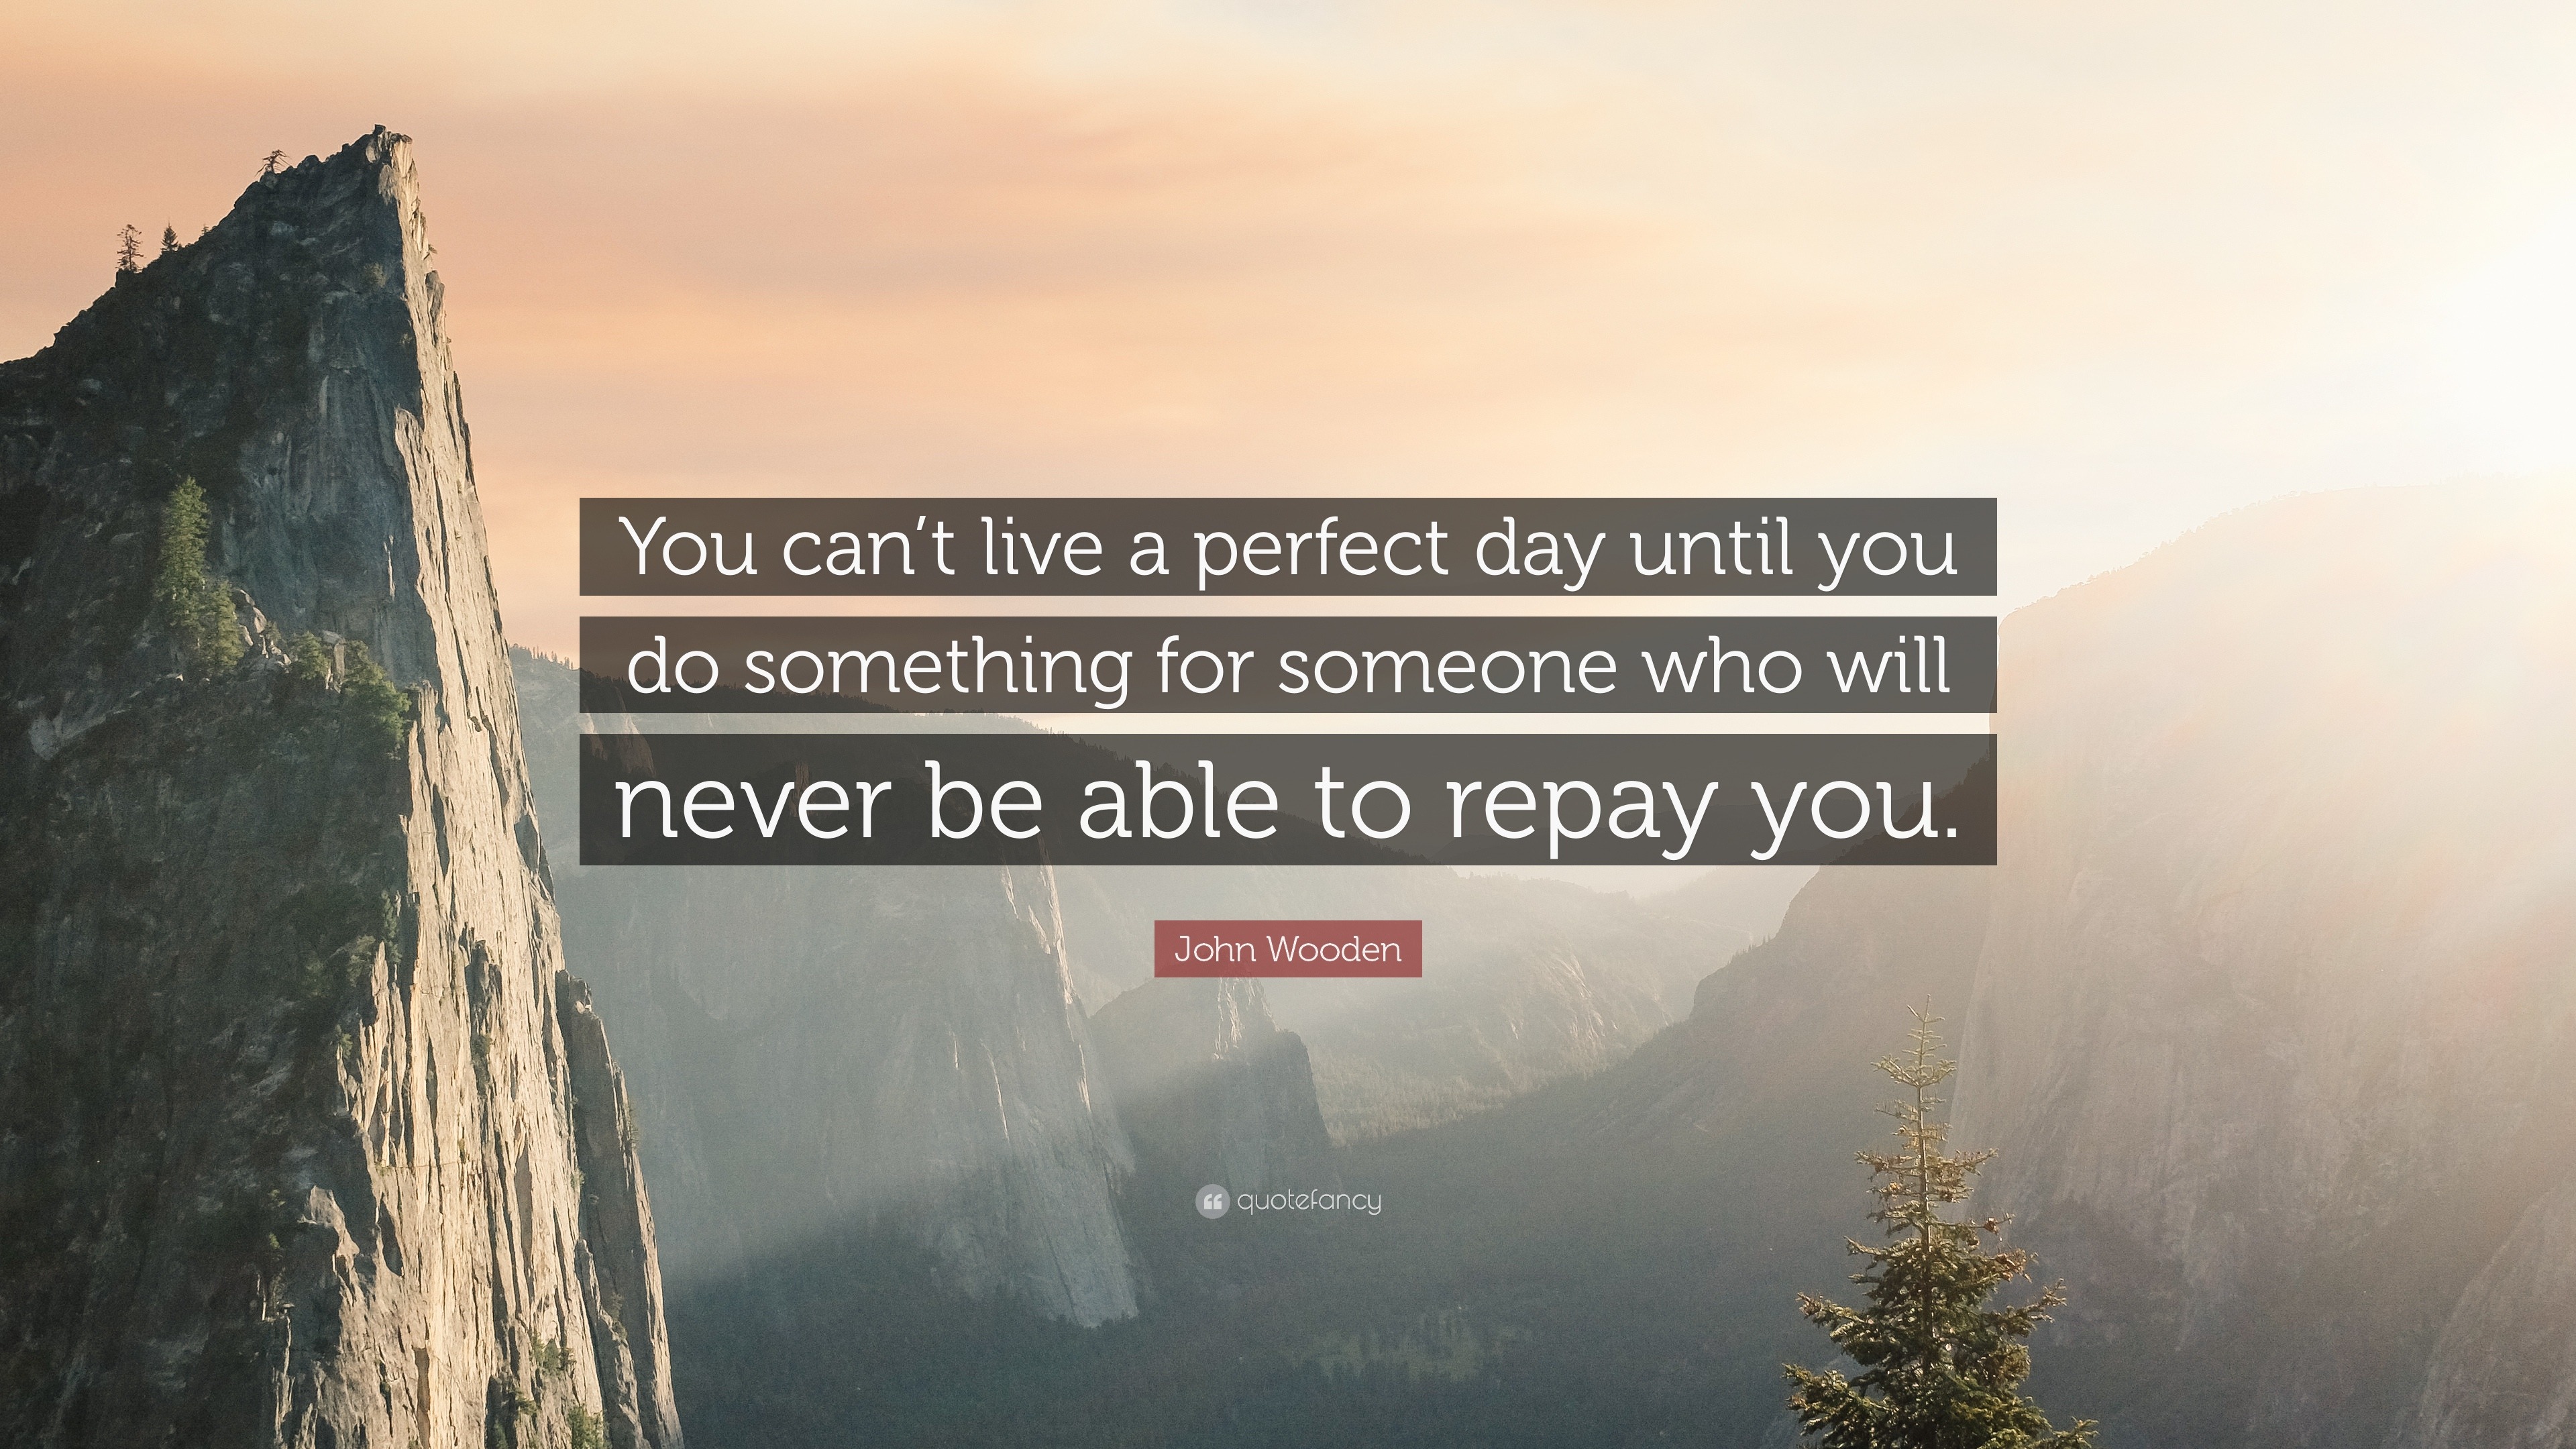 John Wooden Quote: “You can’t live a perfect day until you do something ...